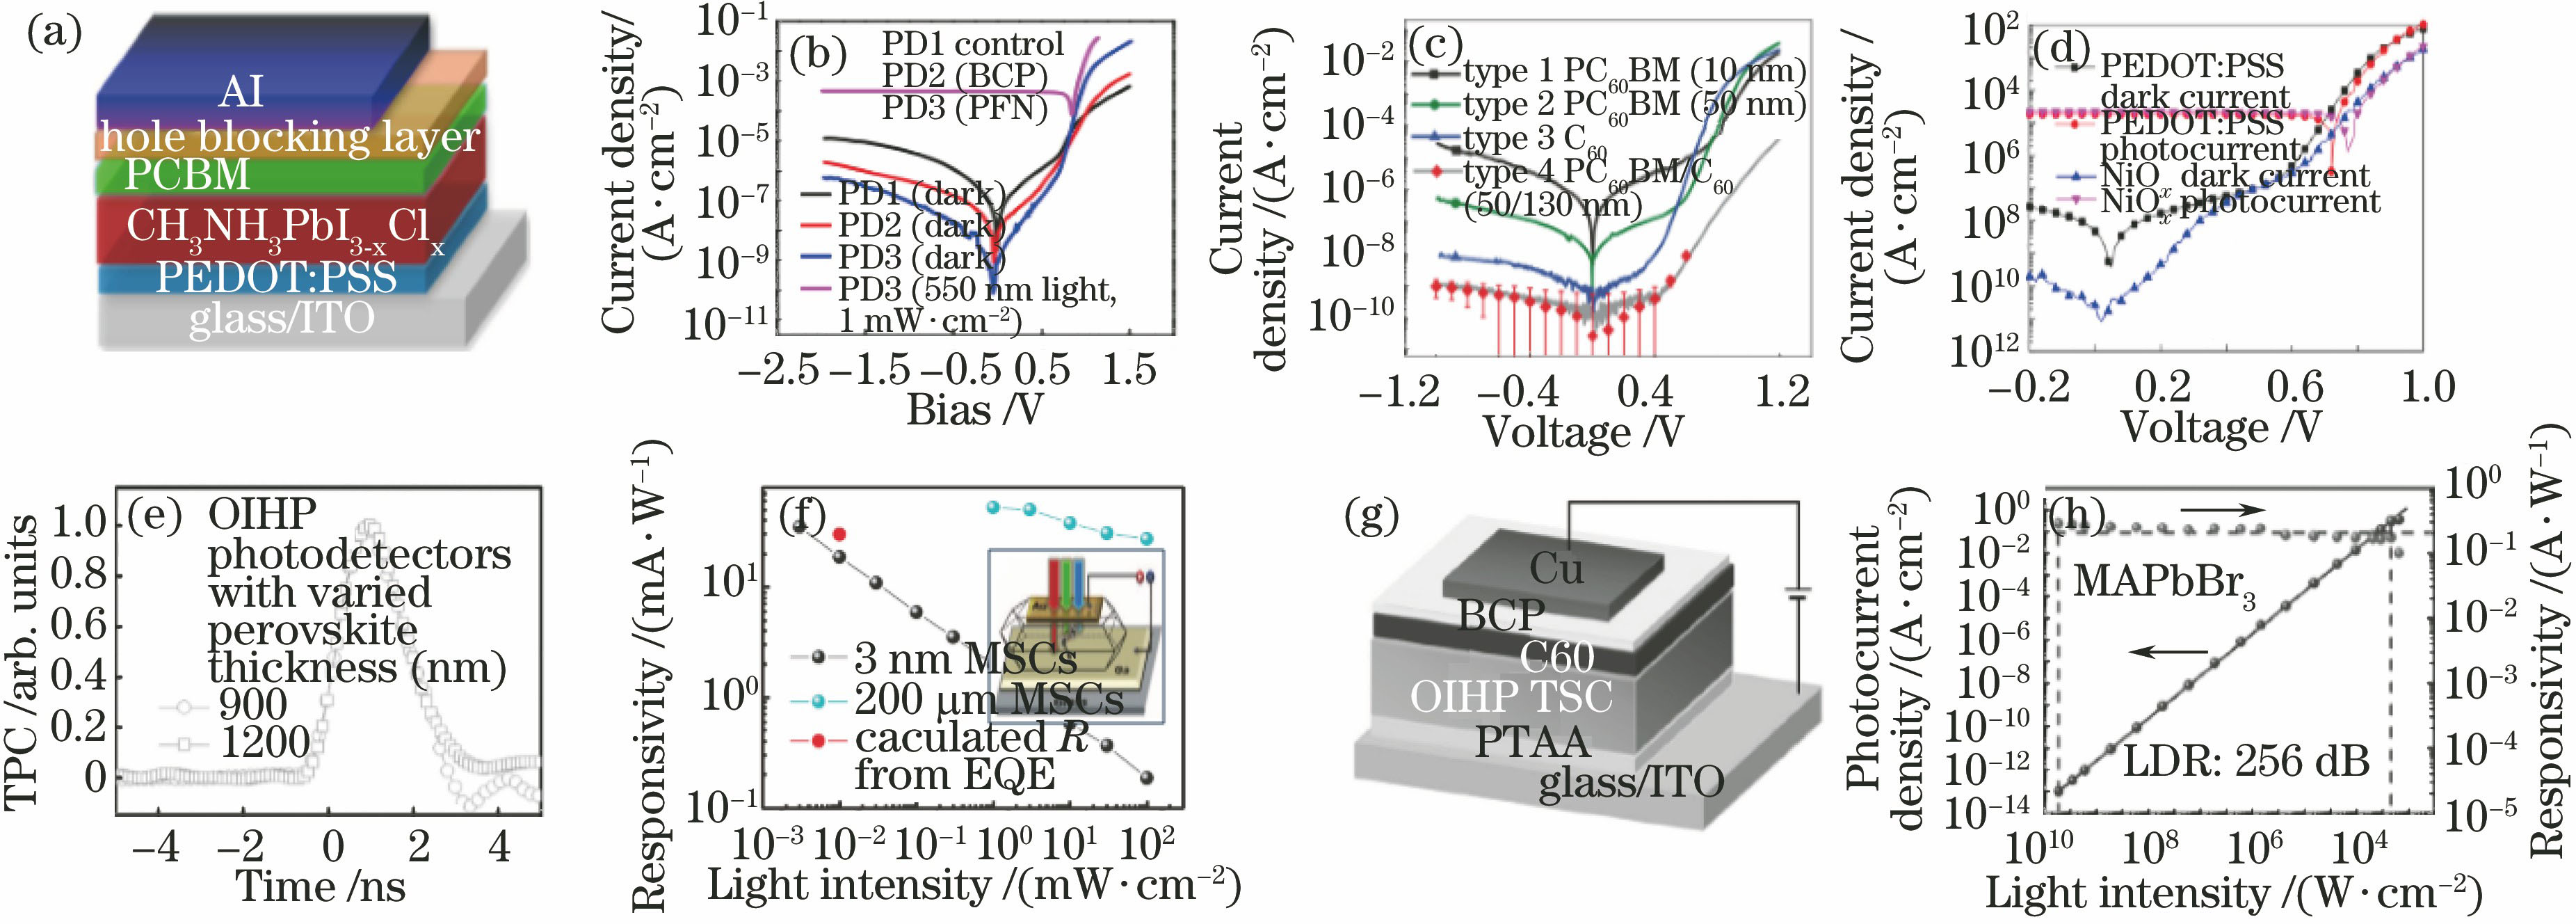 Photovoltaic type perovskite photodetectors-structures and performances. (a)(b)Structural diagram of ITO/PEDOT∶PSS/MAPbX3/PCBM/HBL/Al devices and their J-V curves with different hole blocking layers (HBL)[86]; (c) the J-V curves of photodetectors with different thicknesses of C60 and/or PCBM as the electron transport layer[84]; (d) J-V curves of photodetectors with PEDOT∶PSS or NiOx as the hole transport layer[87]; (e) The transient photon current curve of the ITO/PTAA/MAPbX3/C60/BCP/Cu device[8